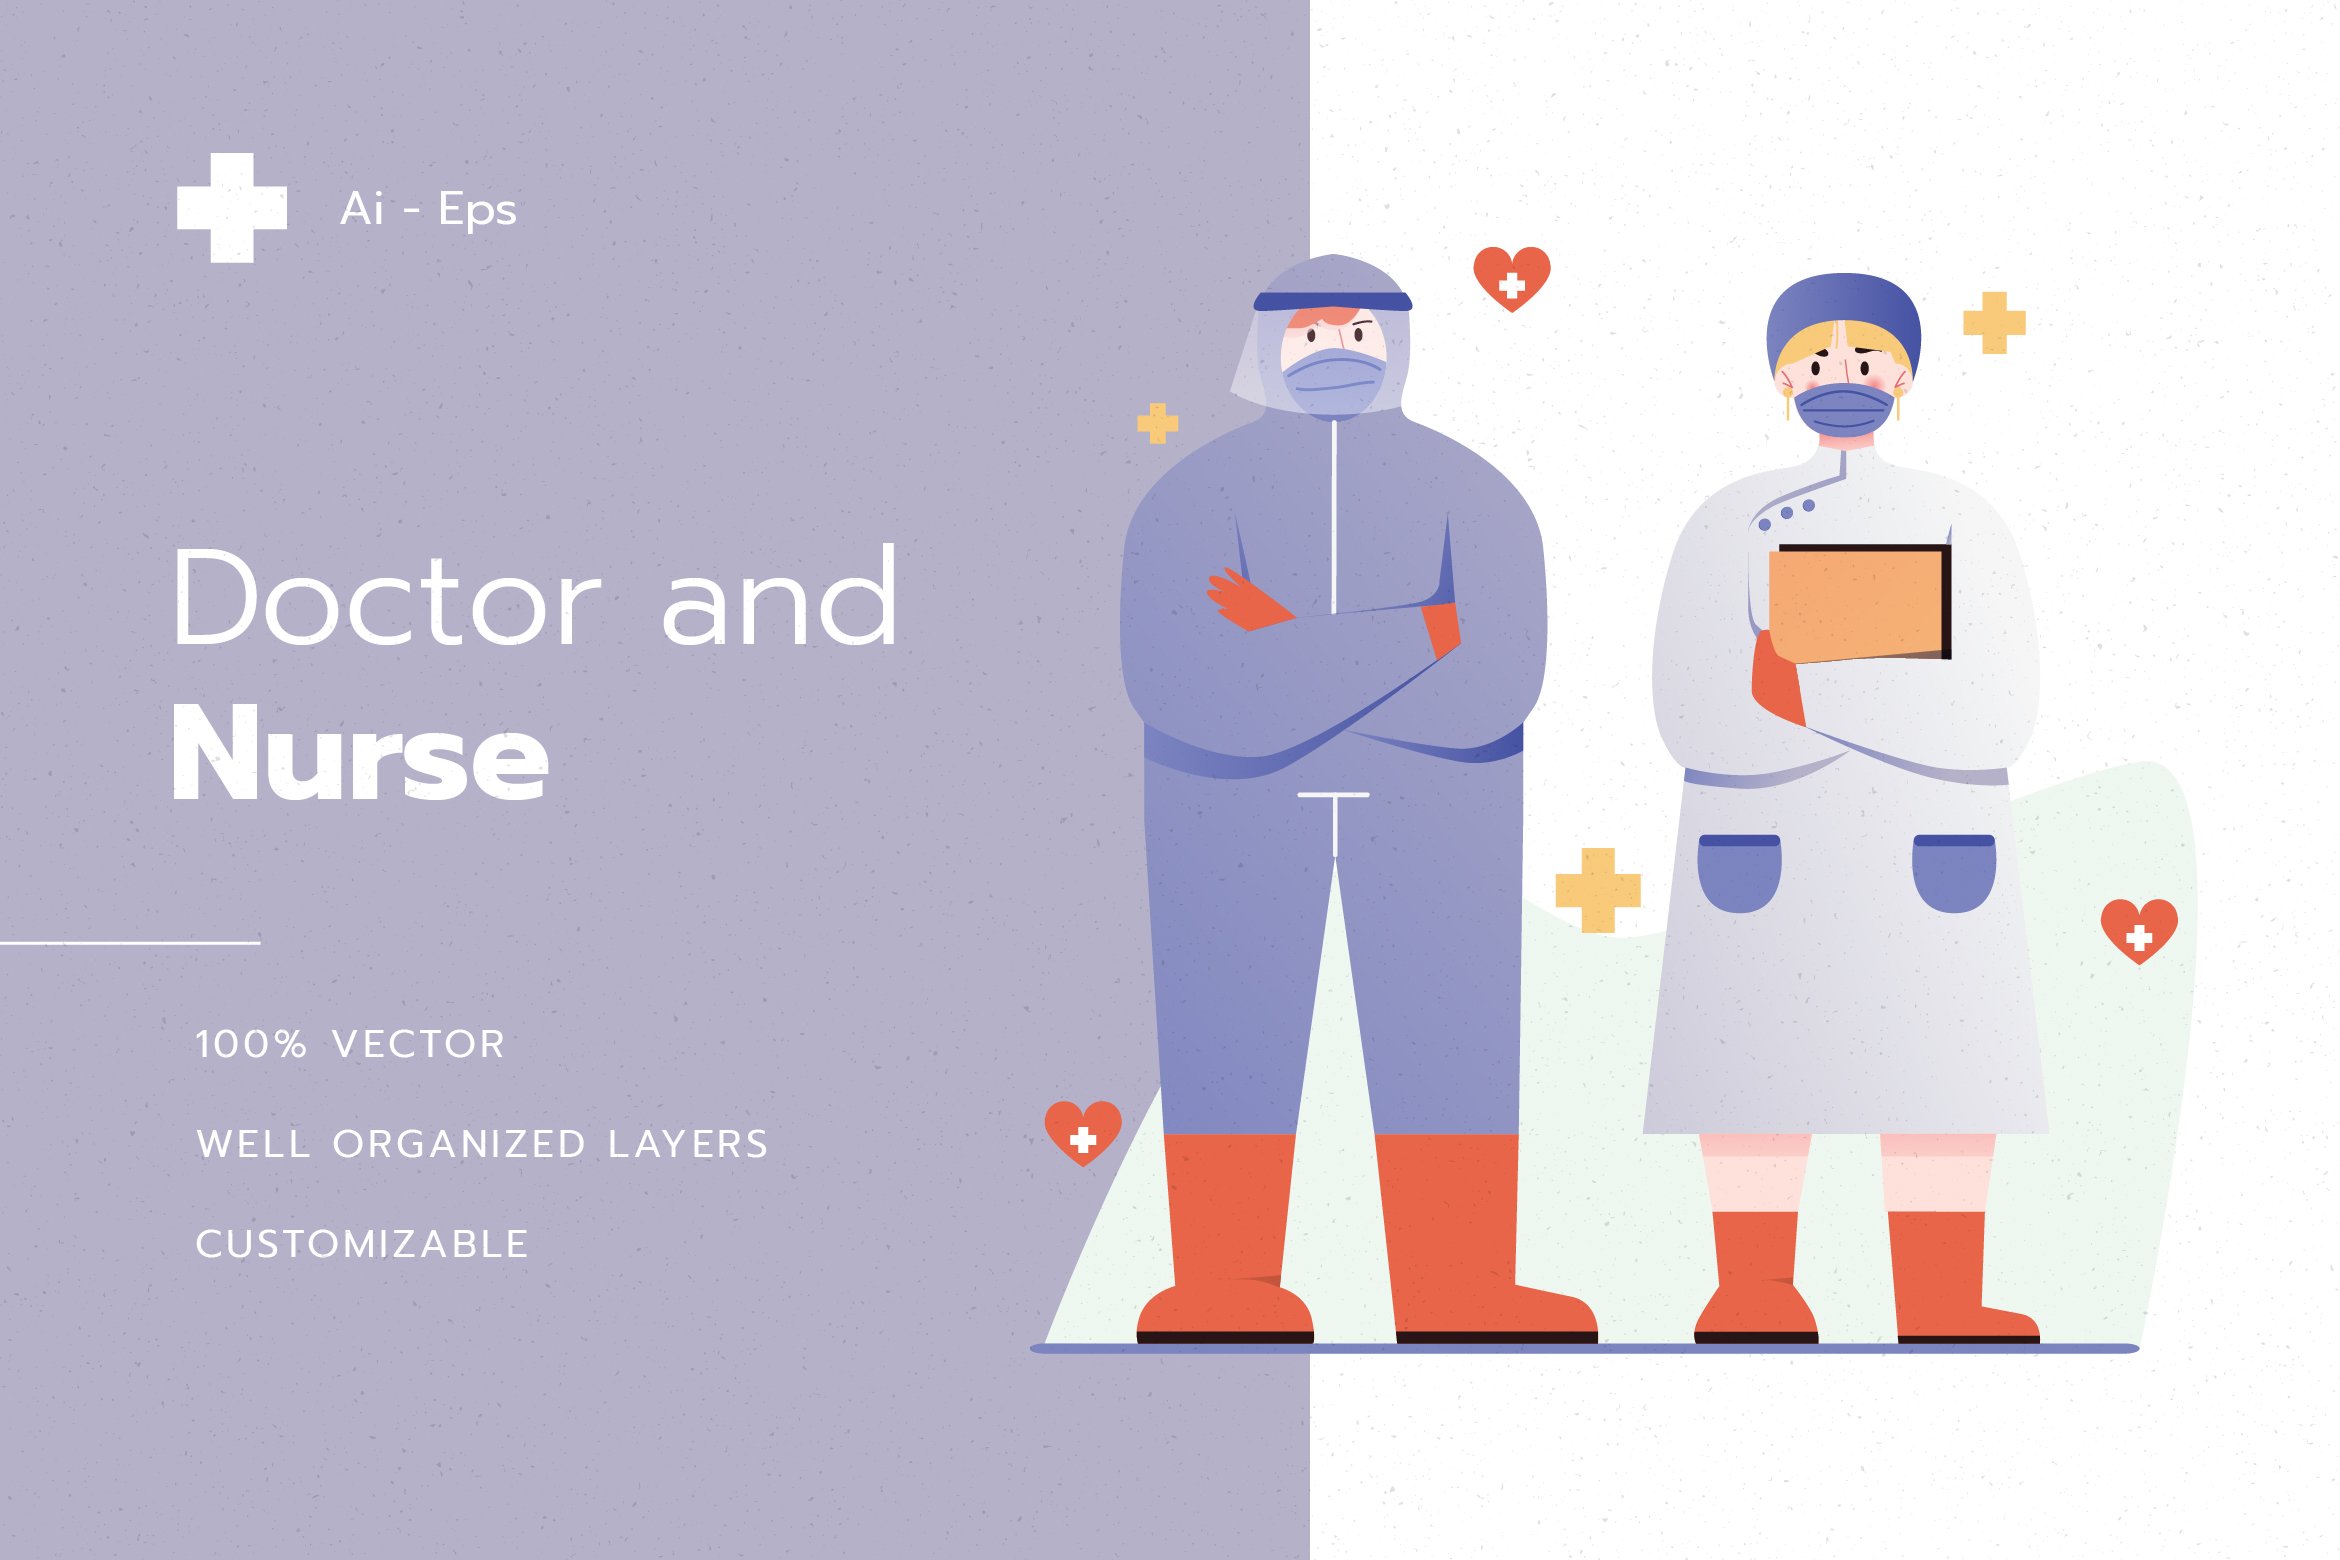 Doctor and Nurse Illustration cover image.